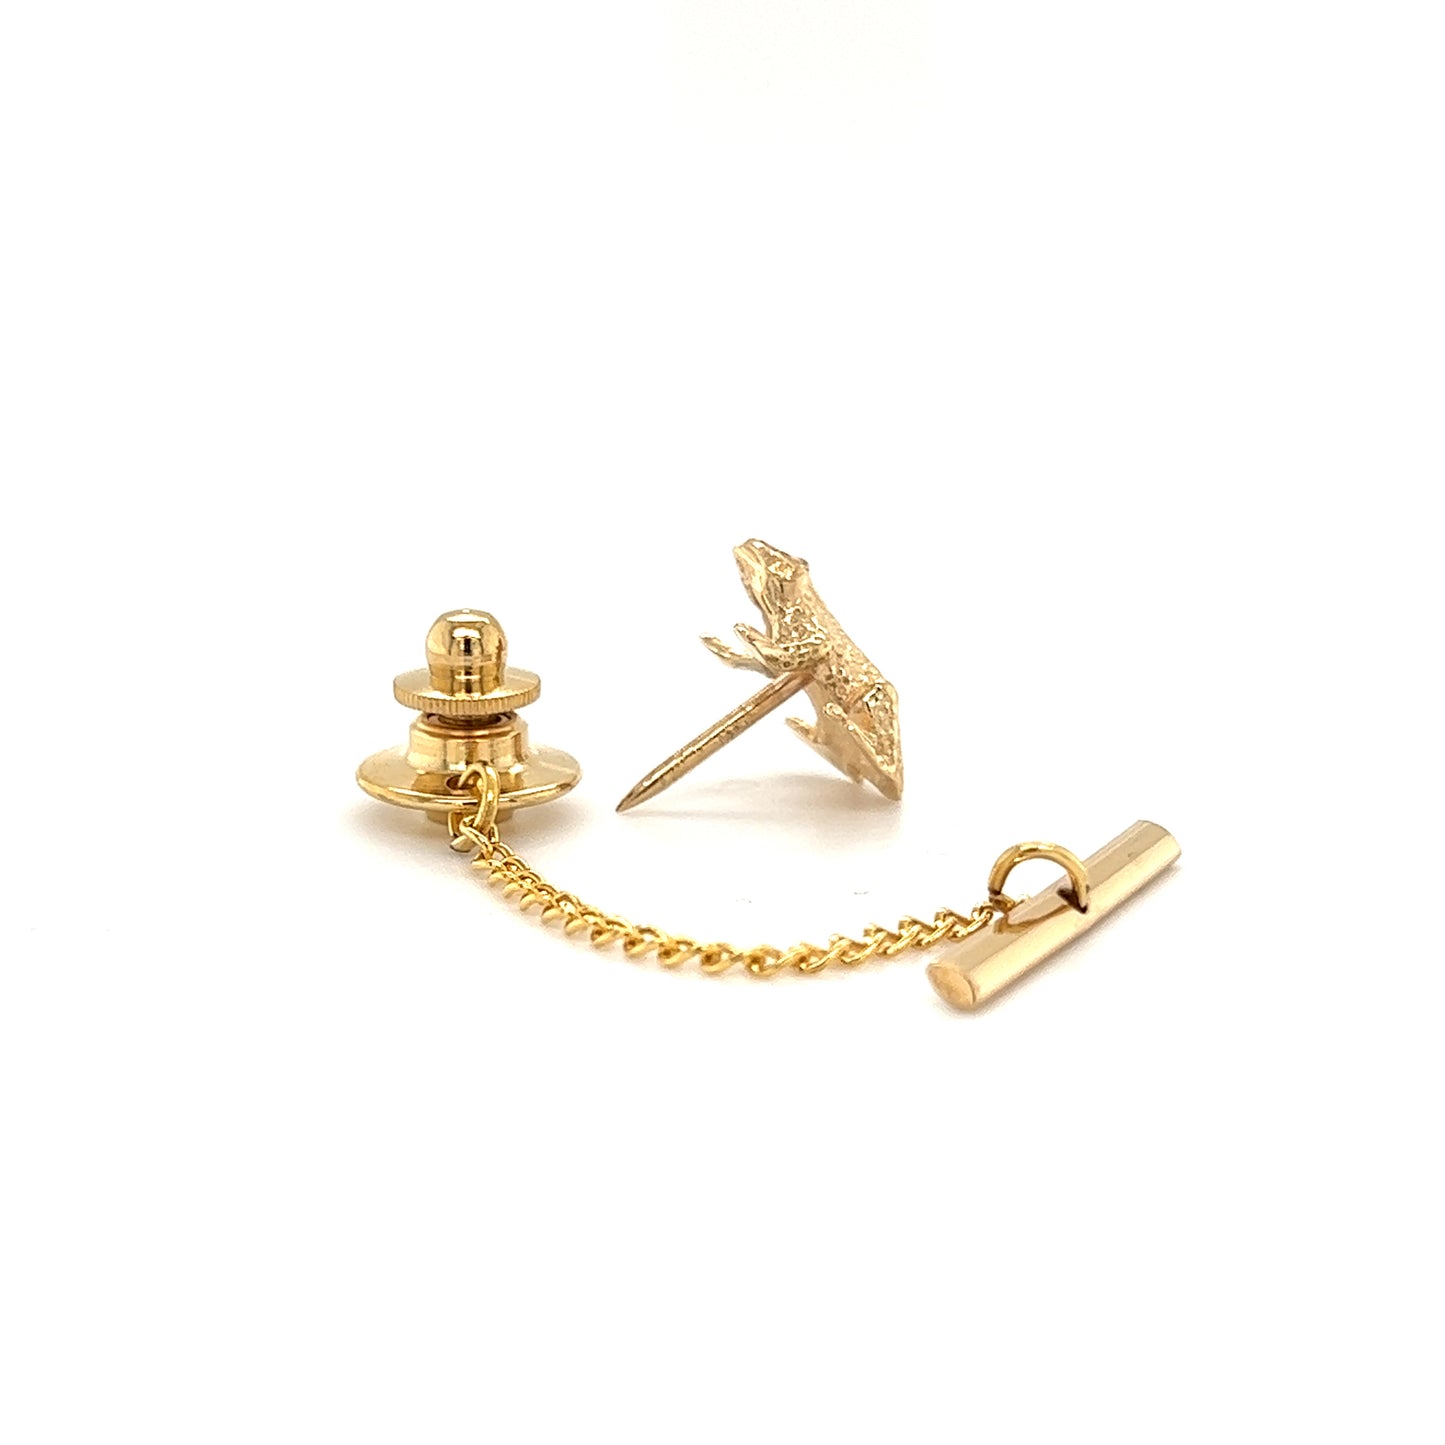 Frog Pin Tie Tack in 14K Yellow Gold Alternative View